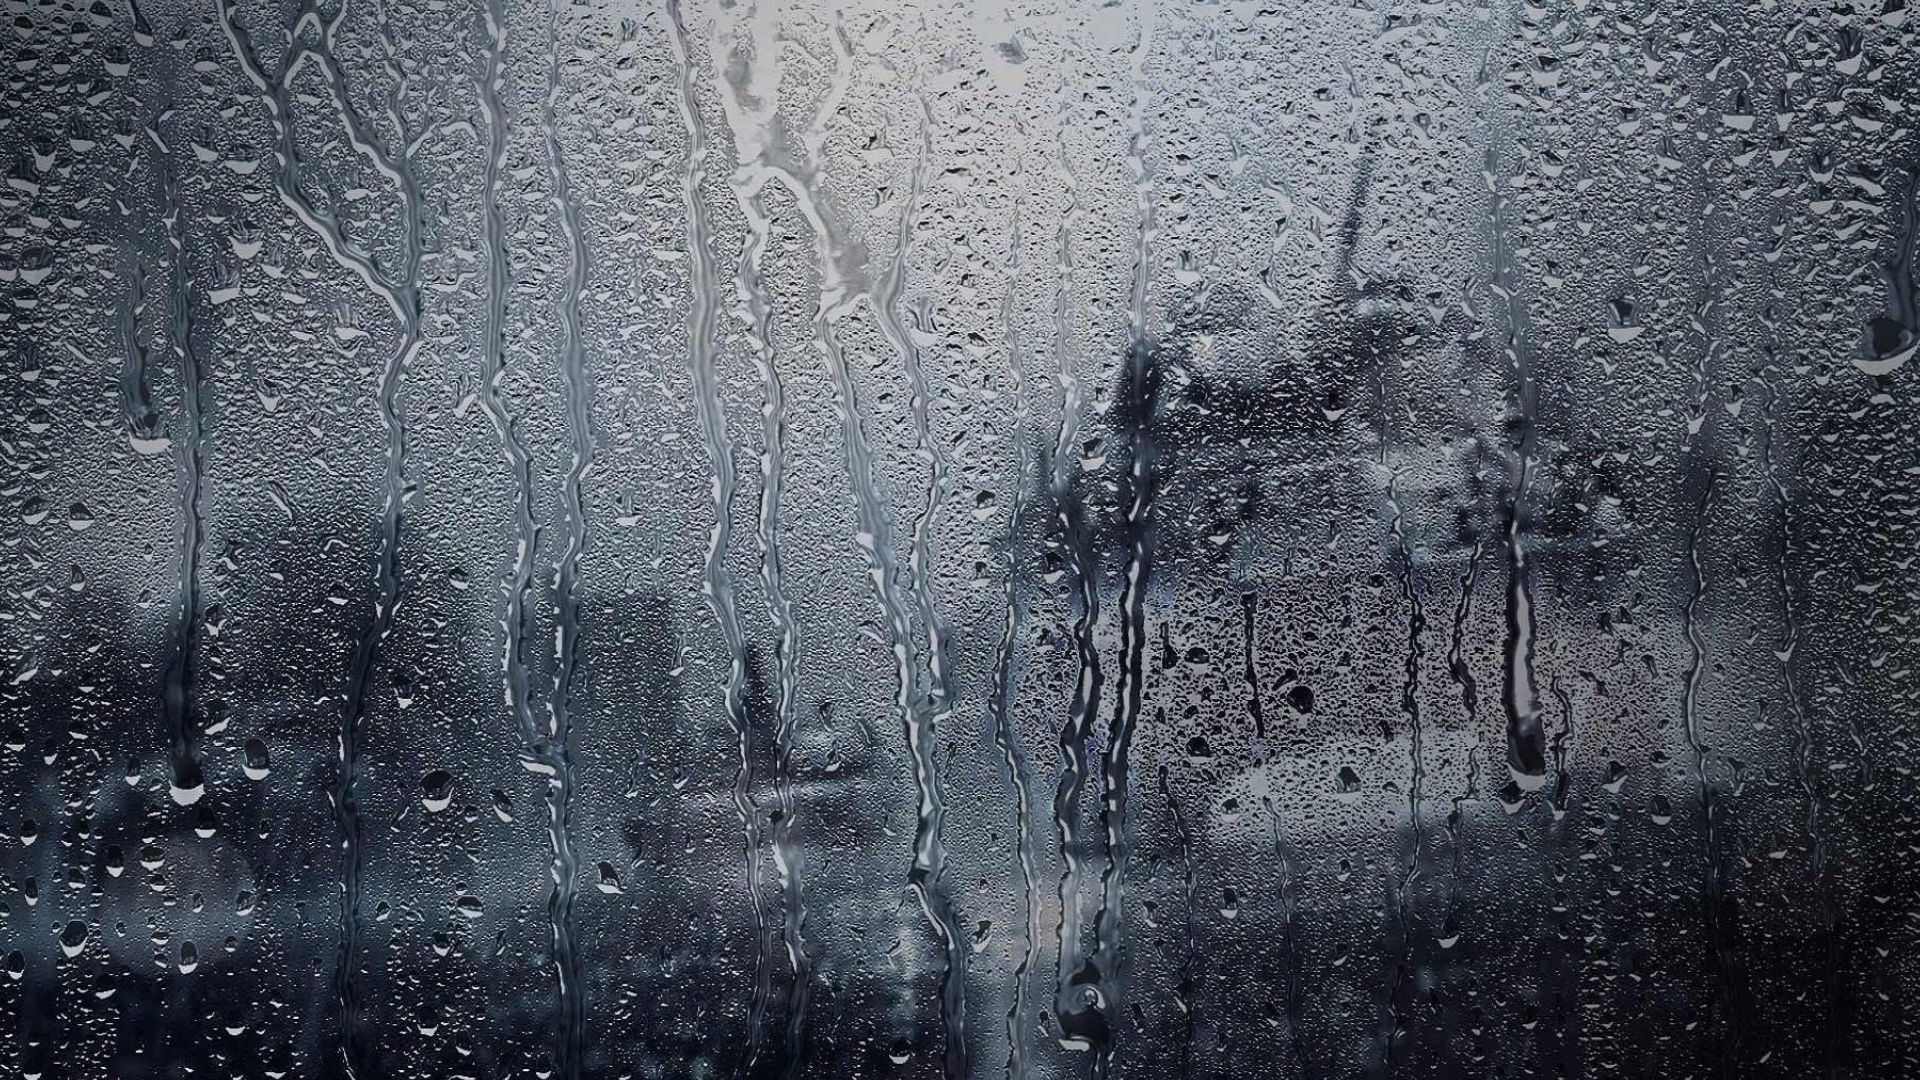 Raindrops on a window, looking out to a dark, wet day - Rain